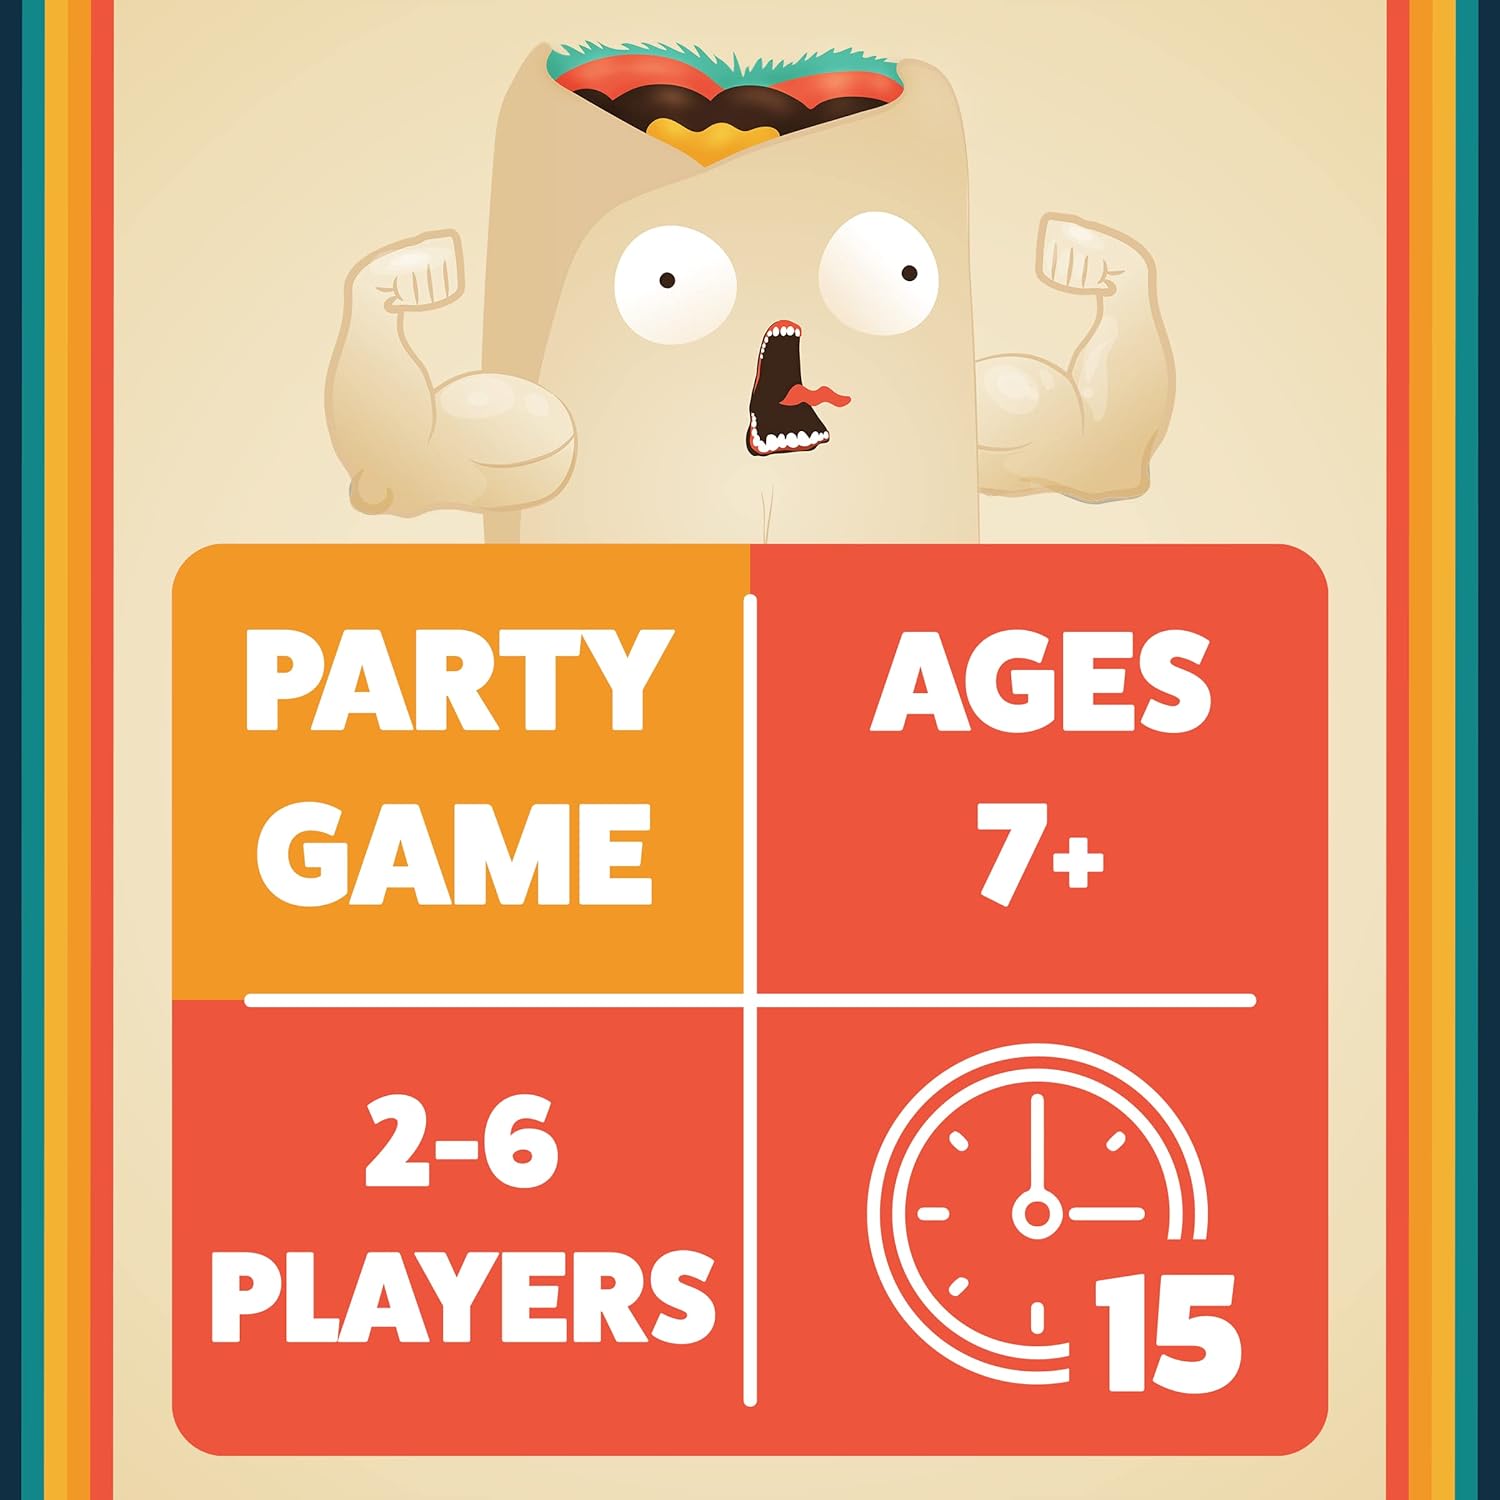 Throw Throw Burrito by Exploding Kittens - A Dodgeball Card Game - Family-Friendly Party Games Cykapu